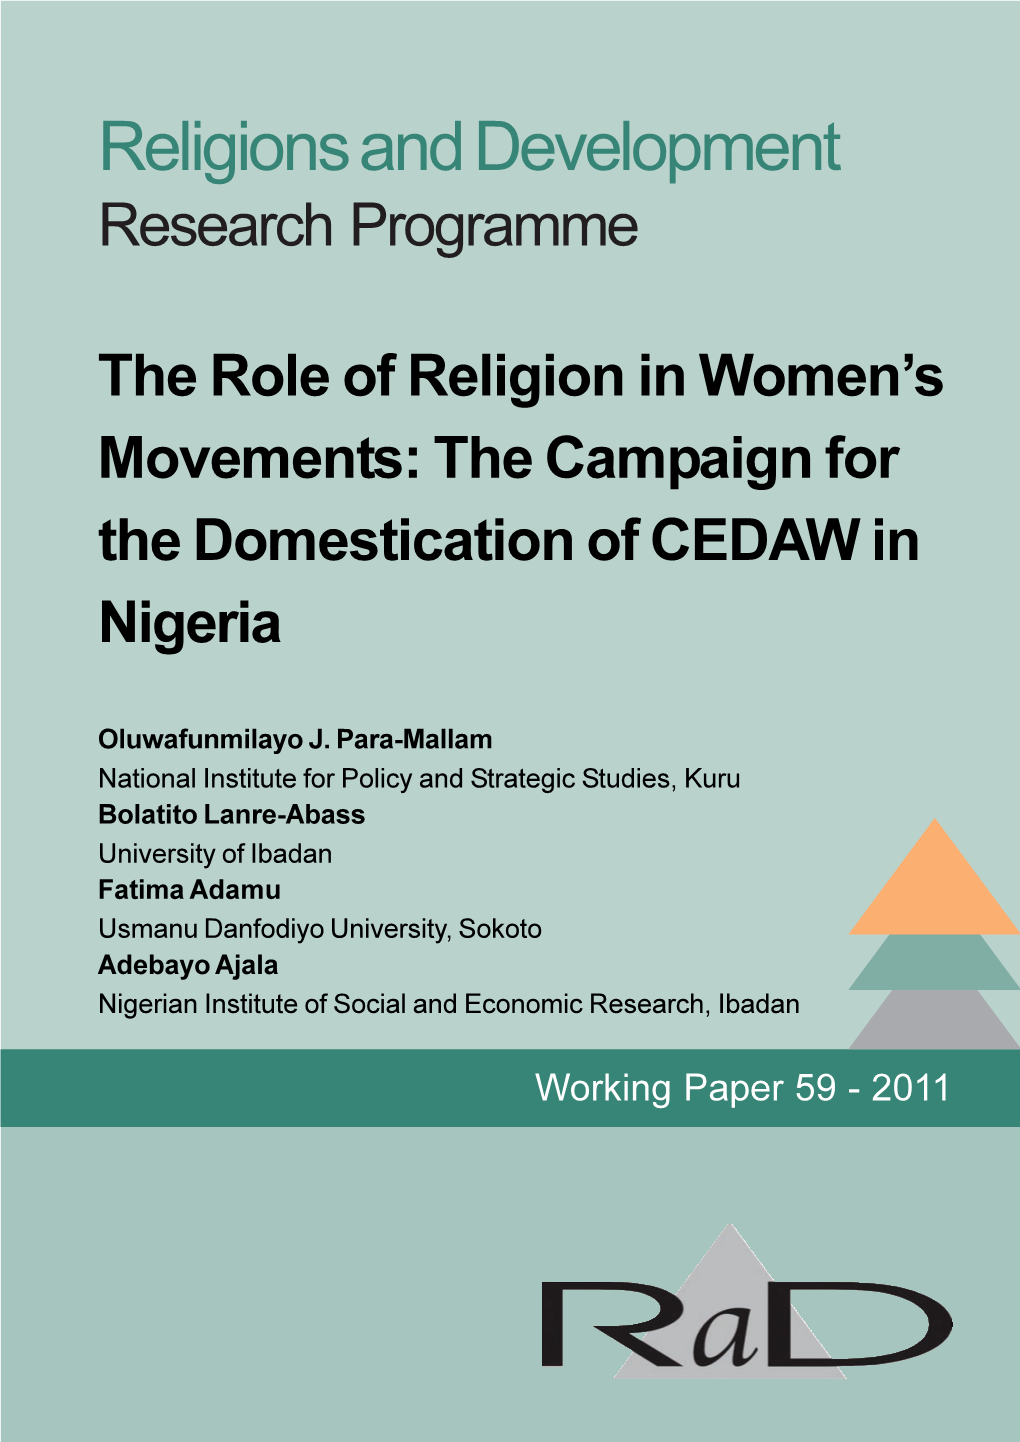 Religions and Development Research Programme